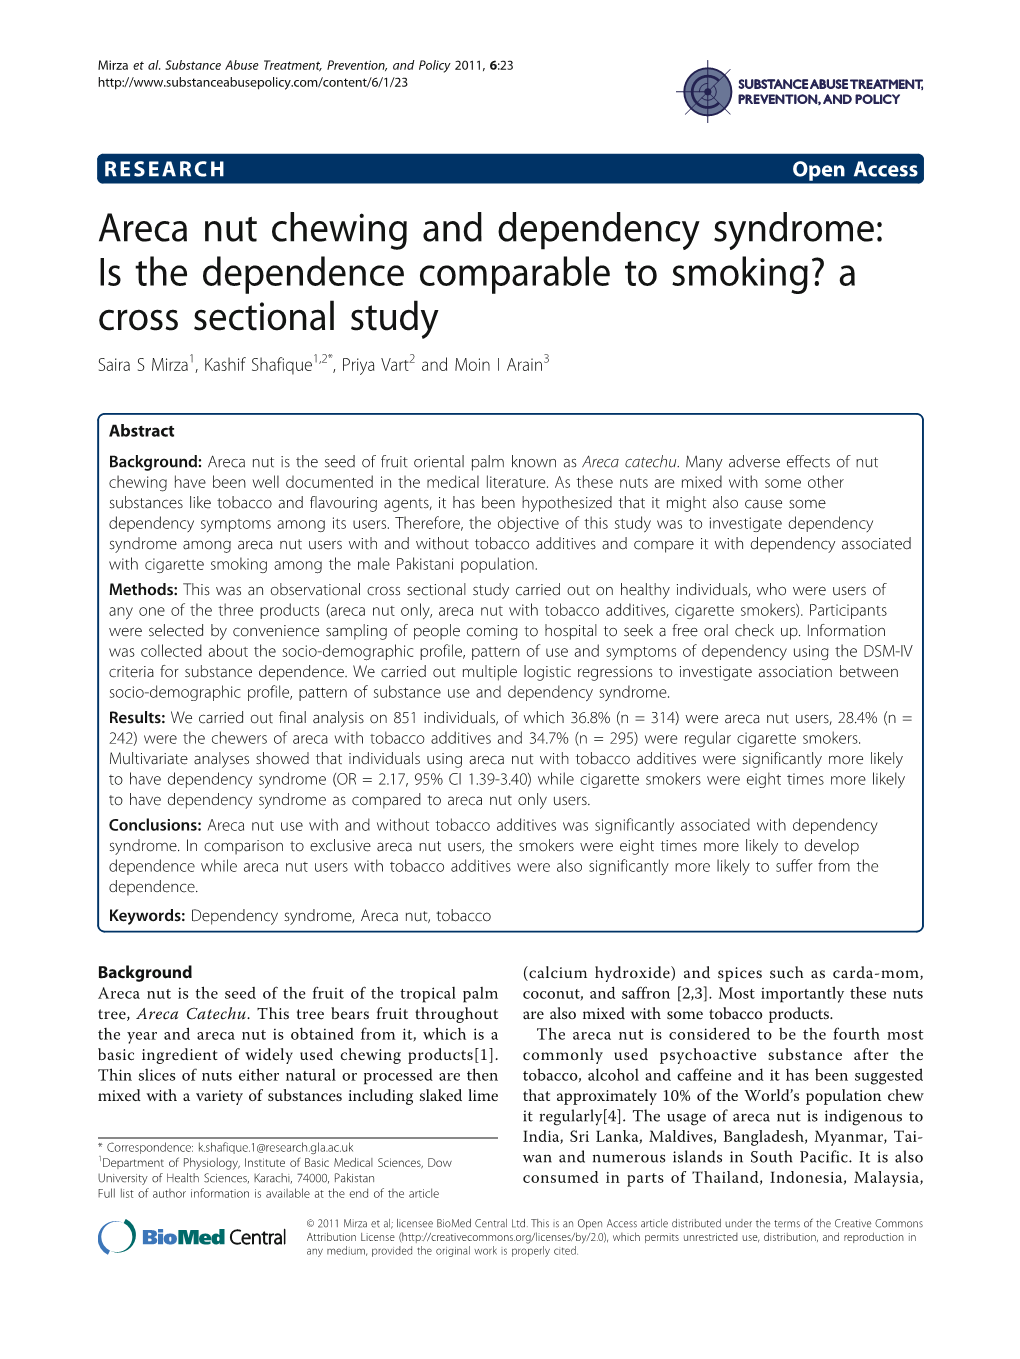 Areca Nut Chewing and Dependency Syndrome